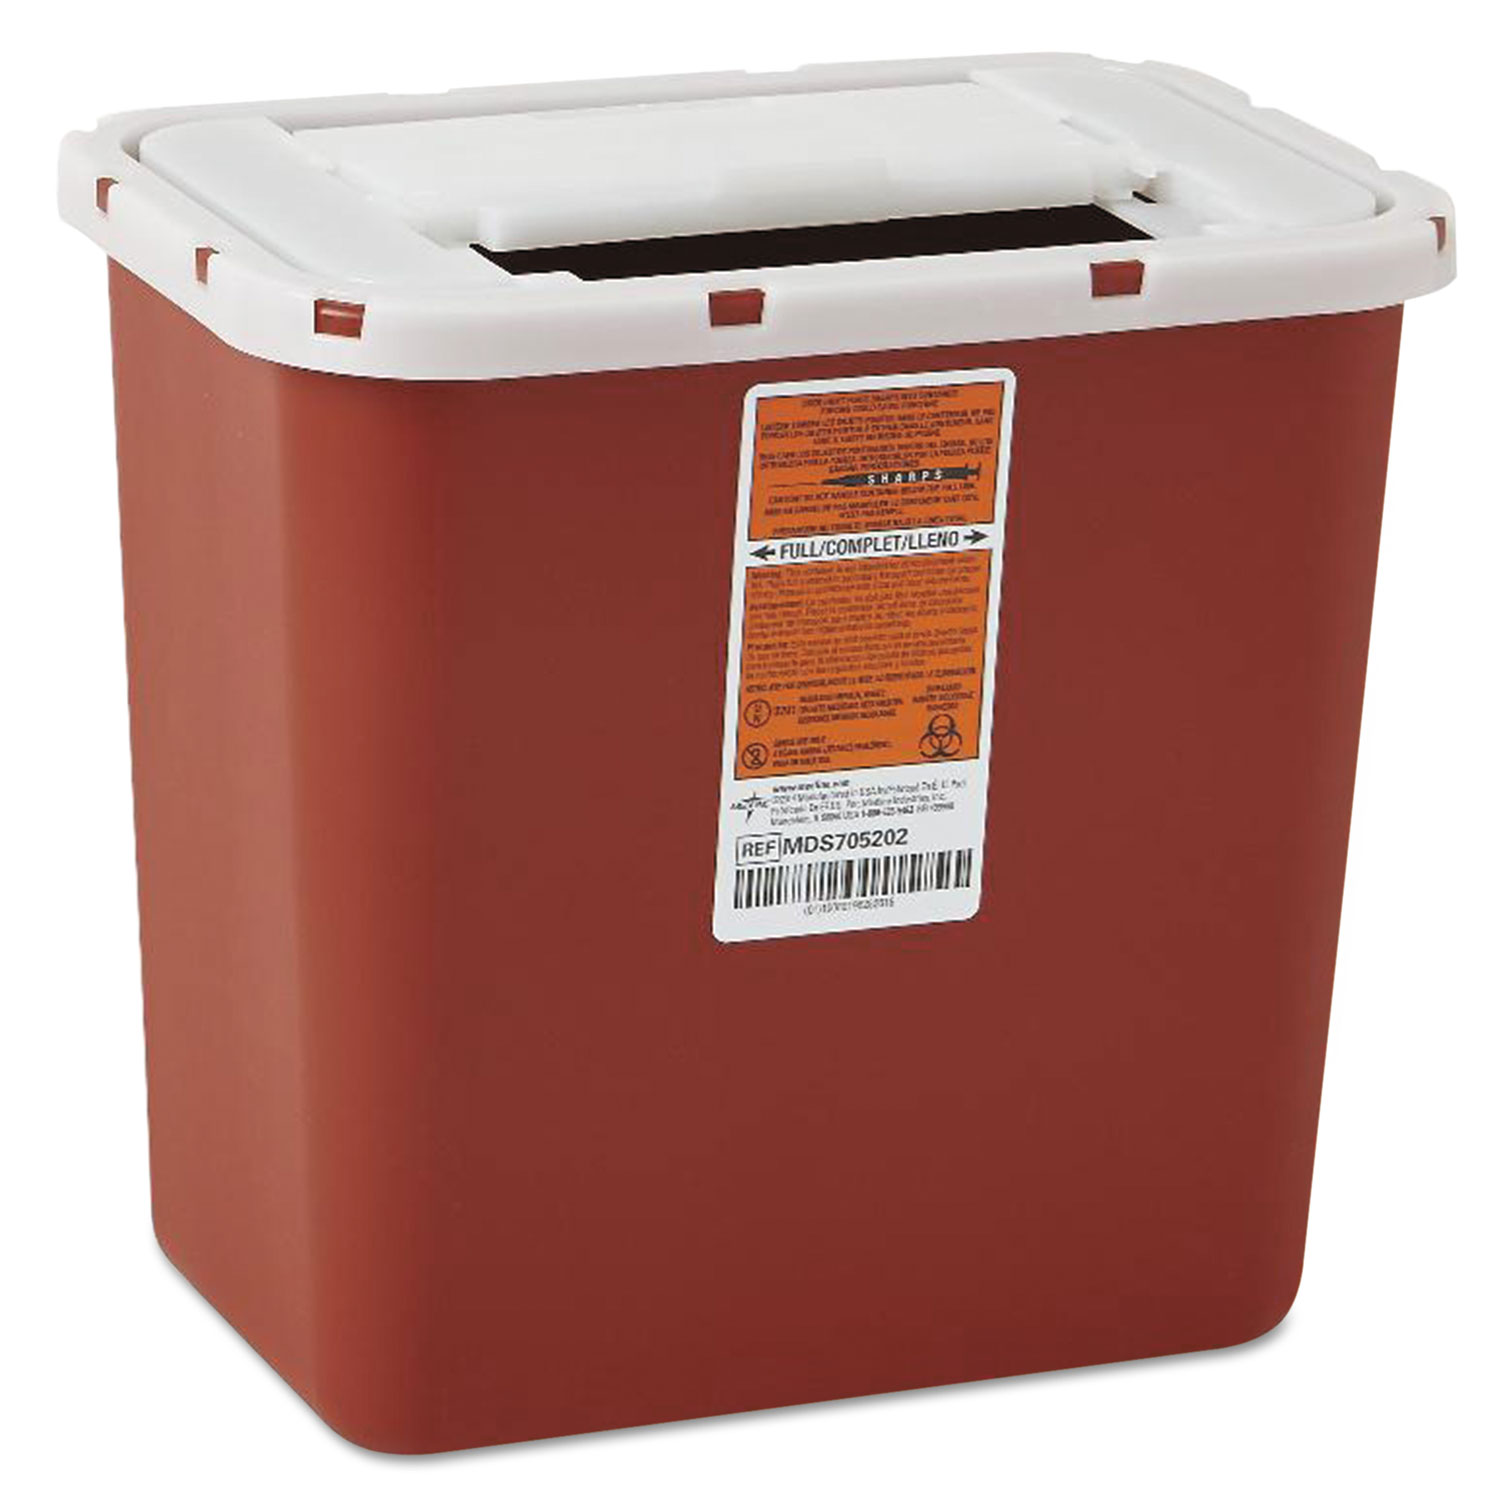 Sharps Container, Freestanding/Wall Mountable, 8qt, 23 1/2 x 19 7/10 x 28, Red